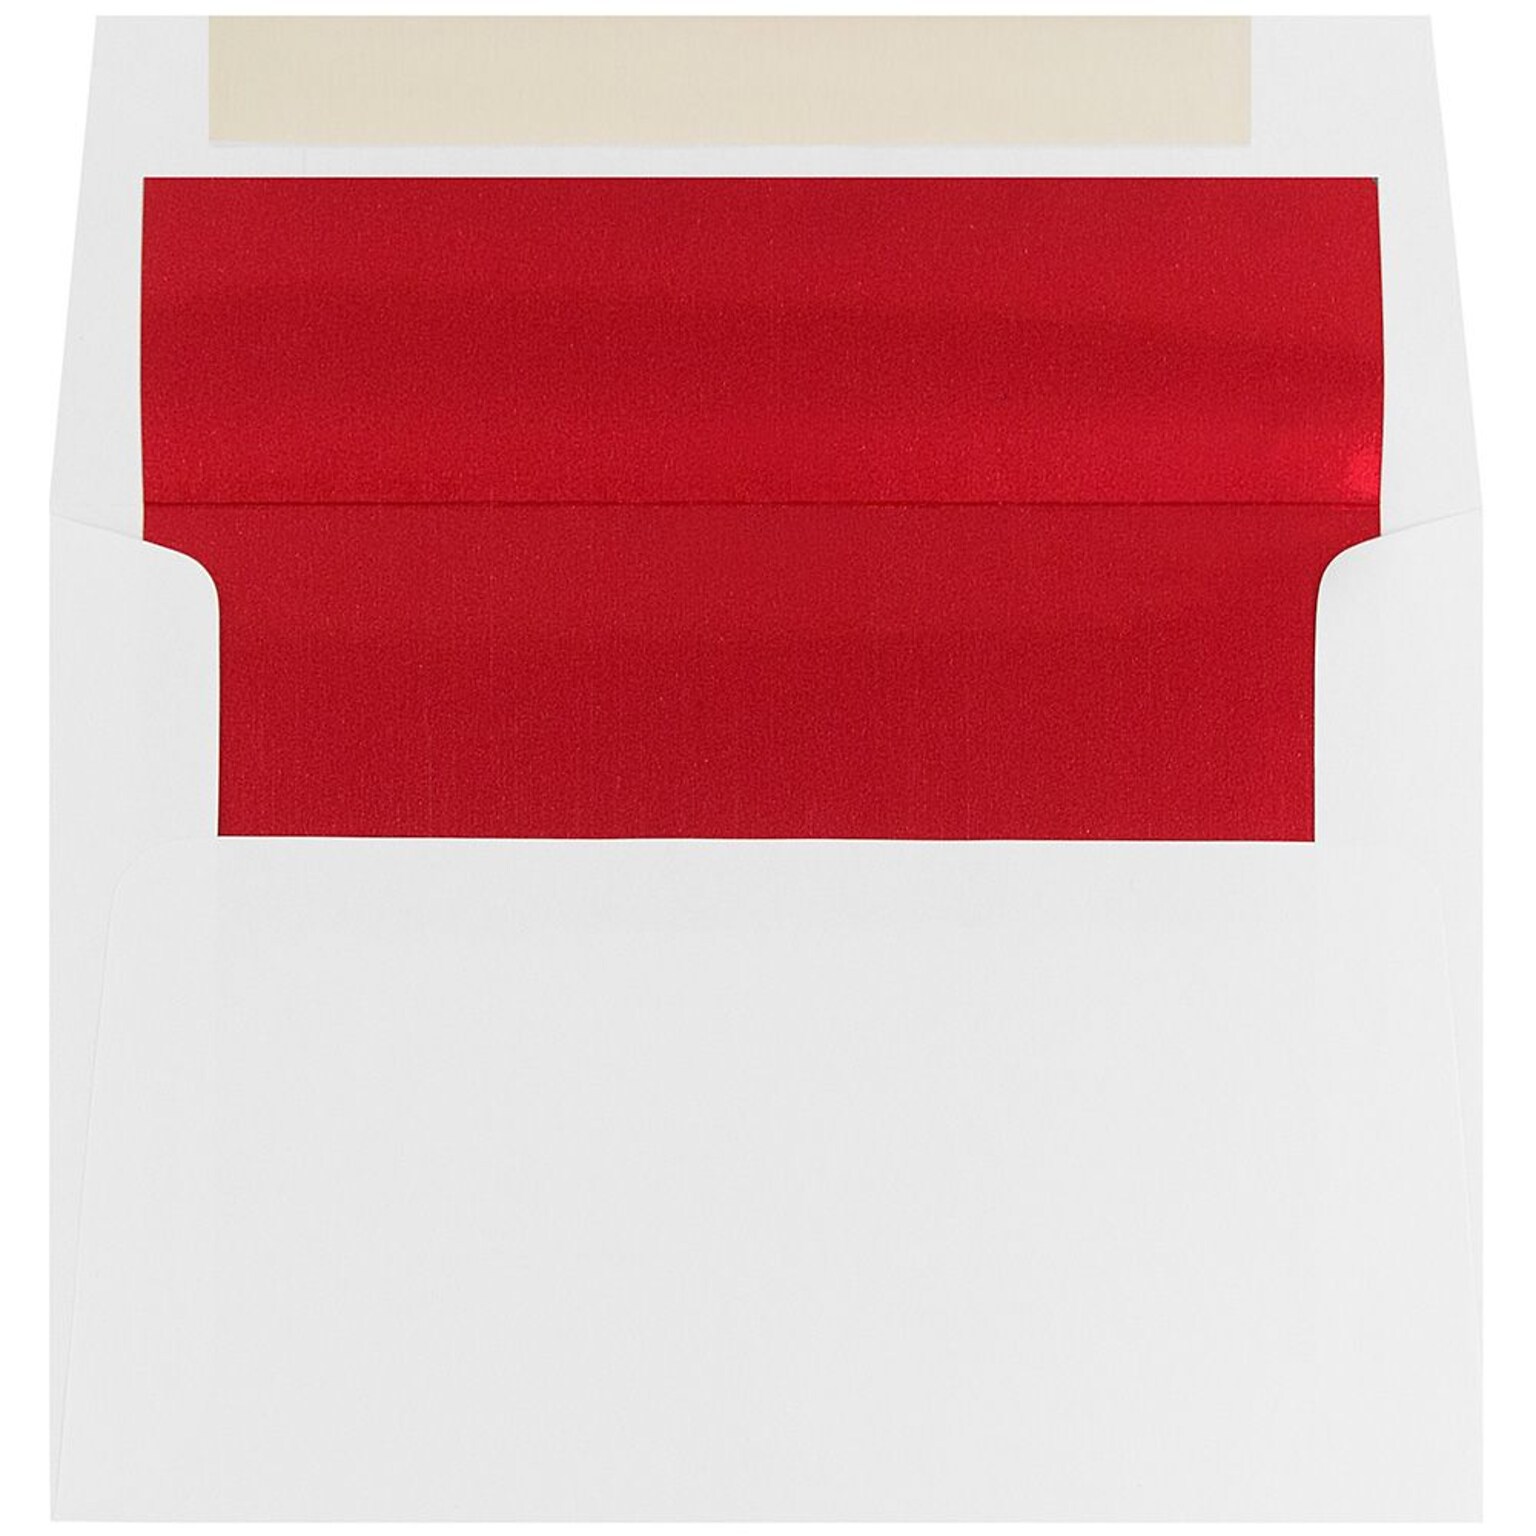 JAM Paper A6 Foil Lined Invitation Envelopes, 4.75 x 6.5, White with Red Foil, 25/Pack (3243655)